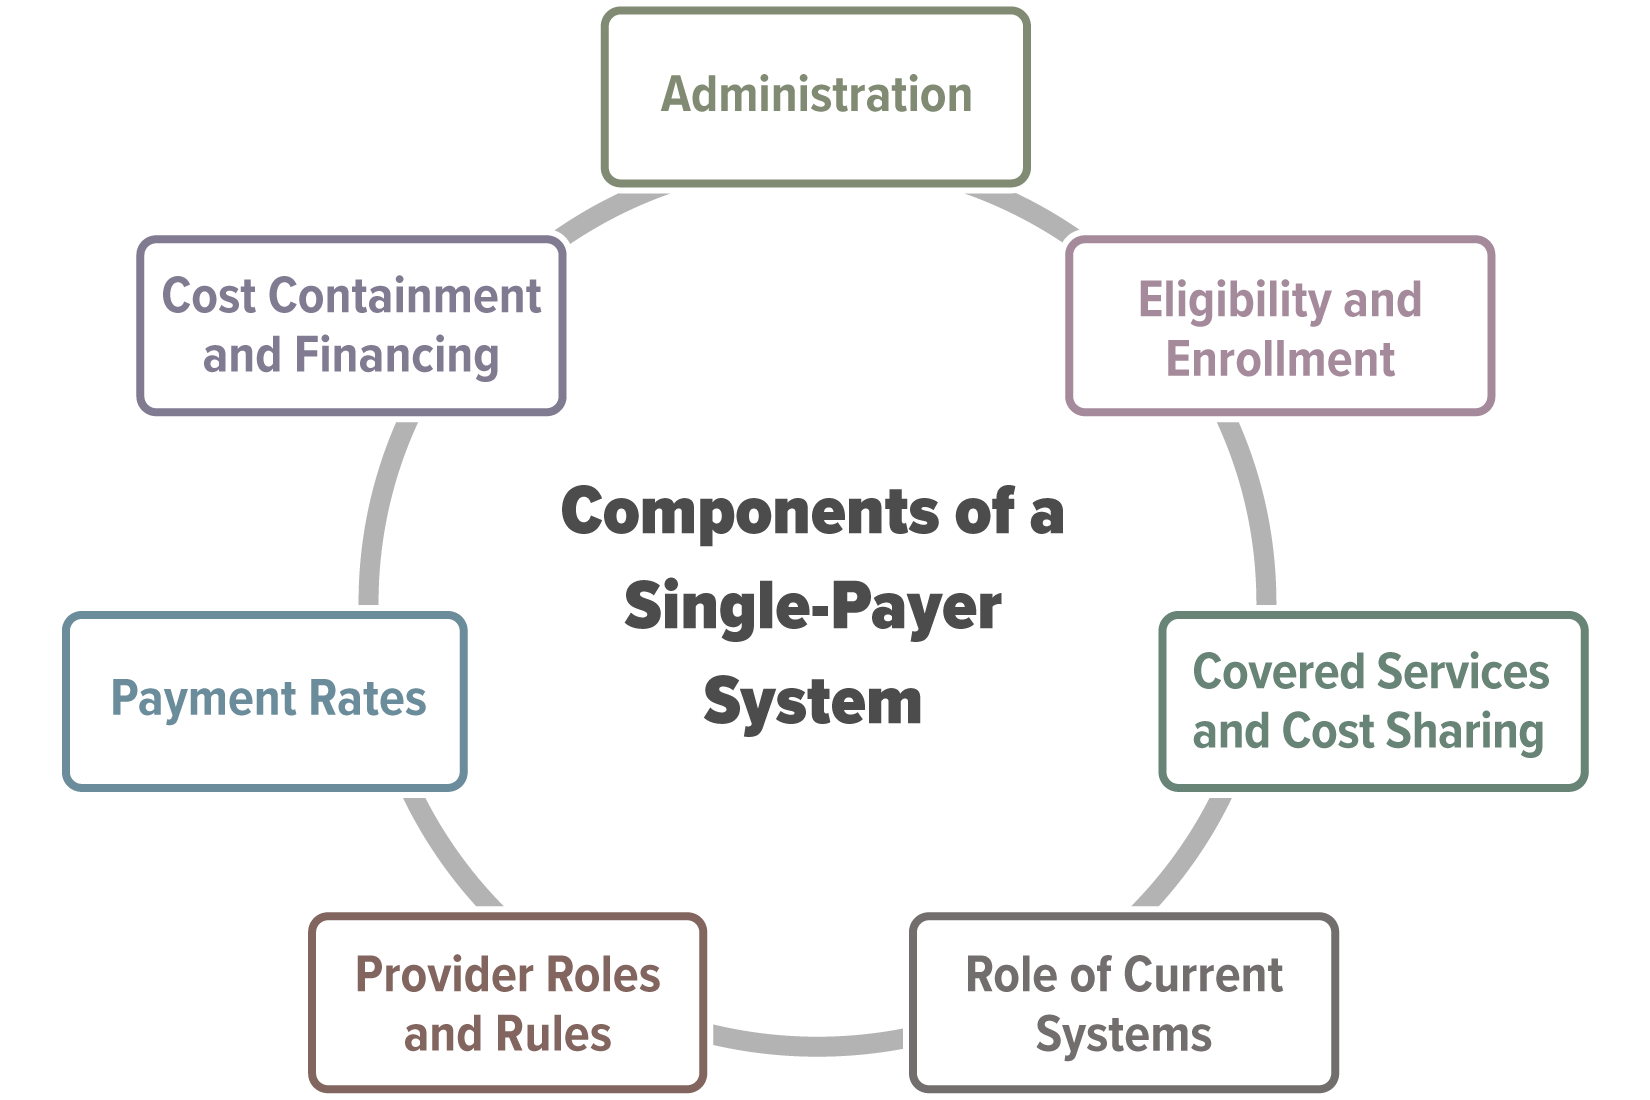 Components of a Single-Payer System